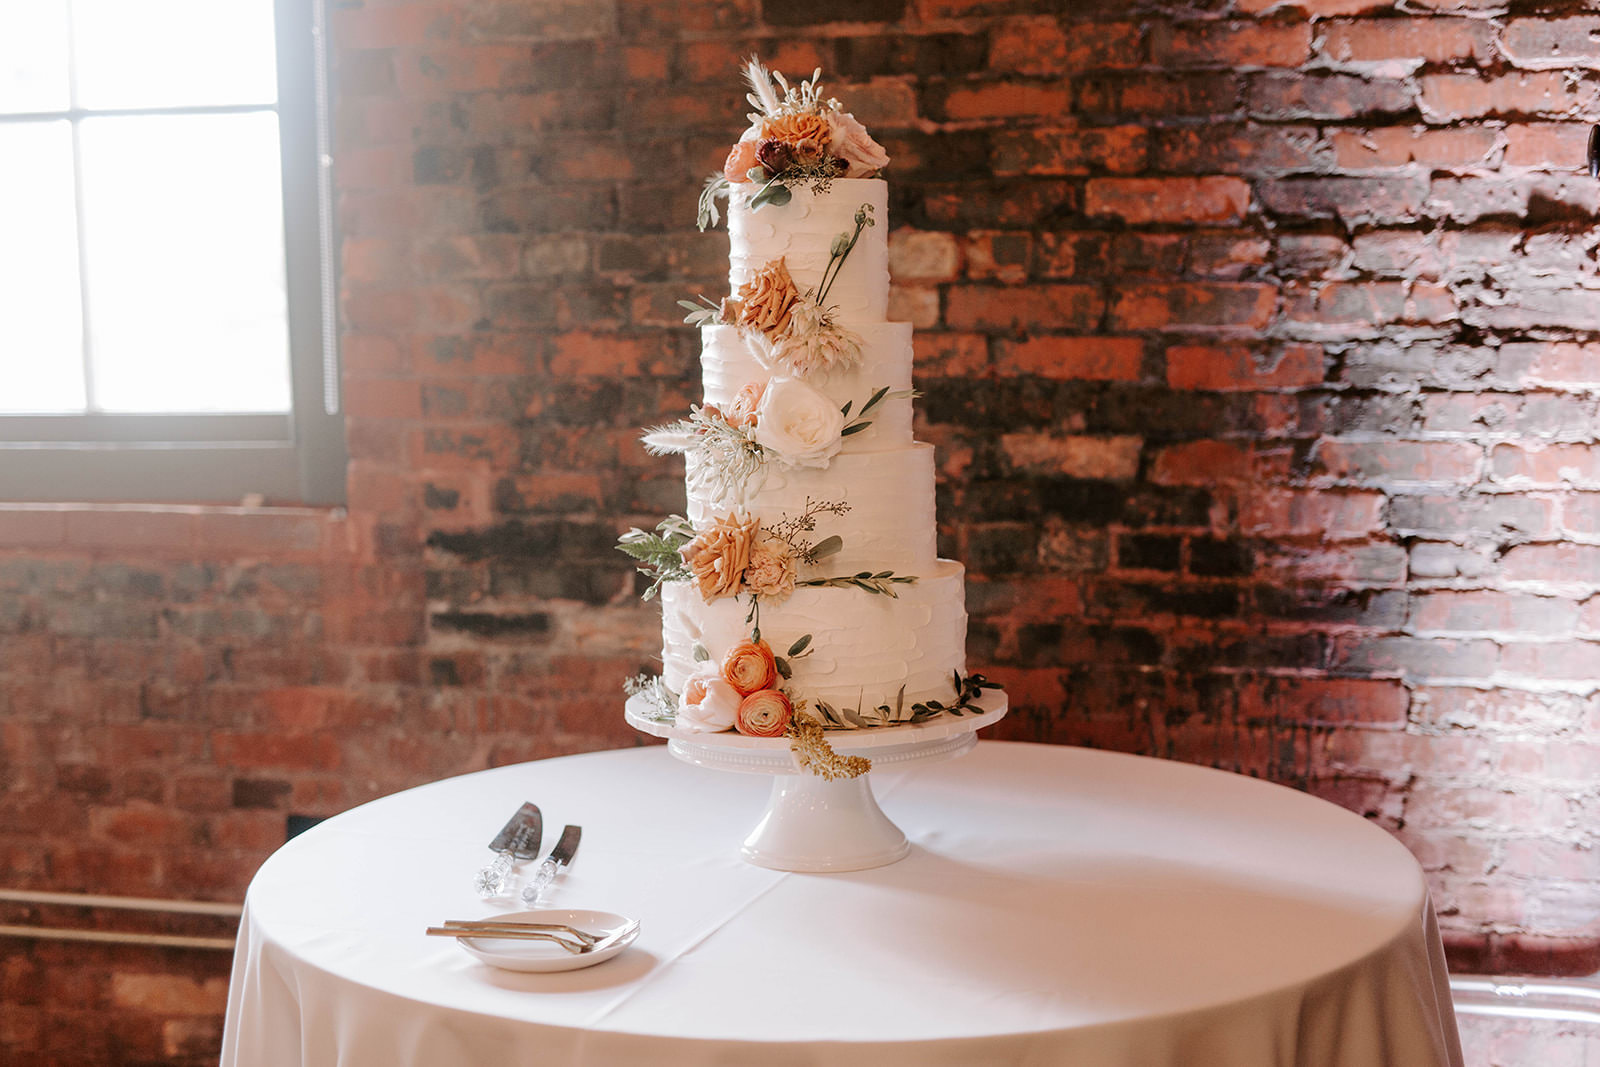 Boho Whimsical Four Tier White Ruffled Buttercream Wedding Cake Garnished with Real Burnt Orange Peonies, White and Blush Pink Roses | Tampa Bay Wedding Cake Bakery The Artistic Whisk | Tampa Bay Wedding Planner Coastal Coordinating